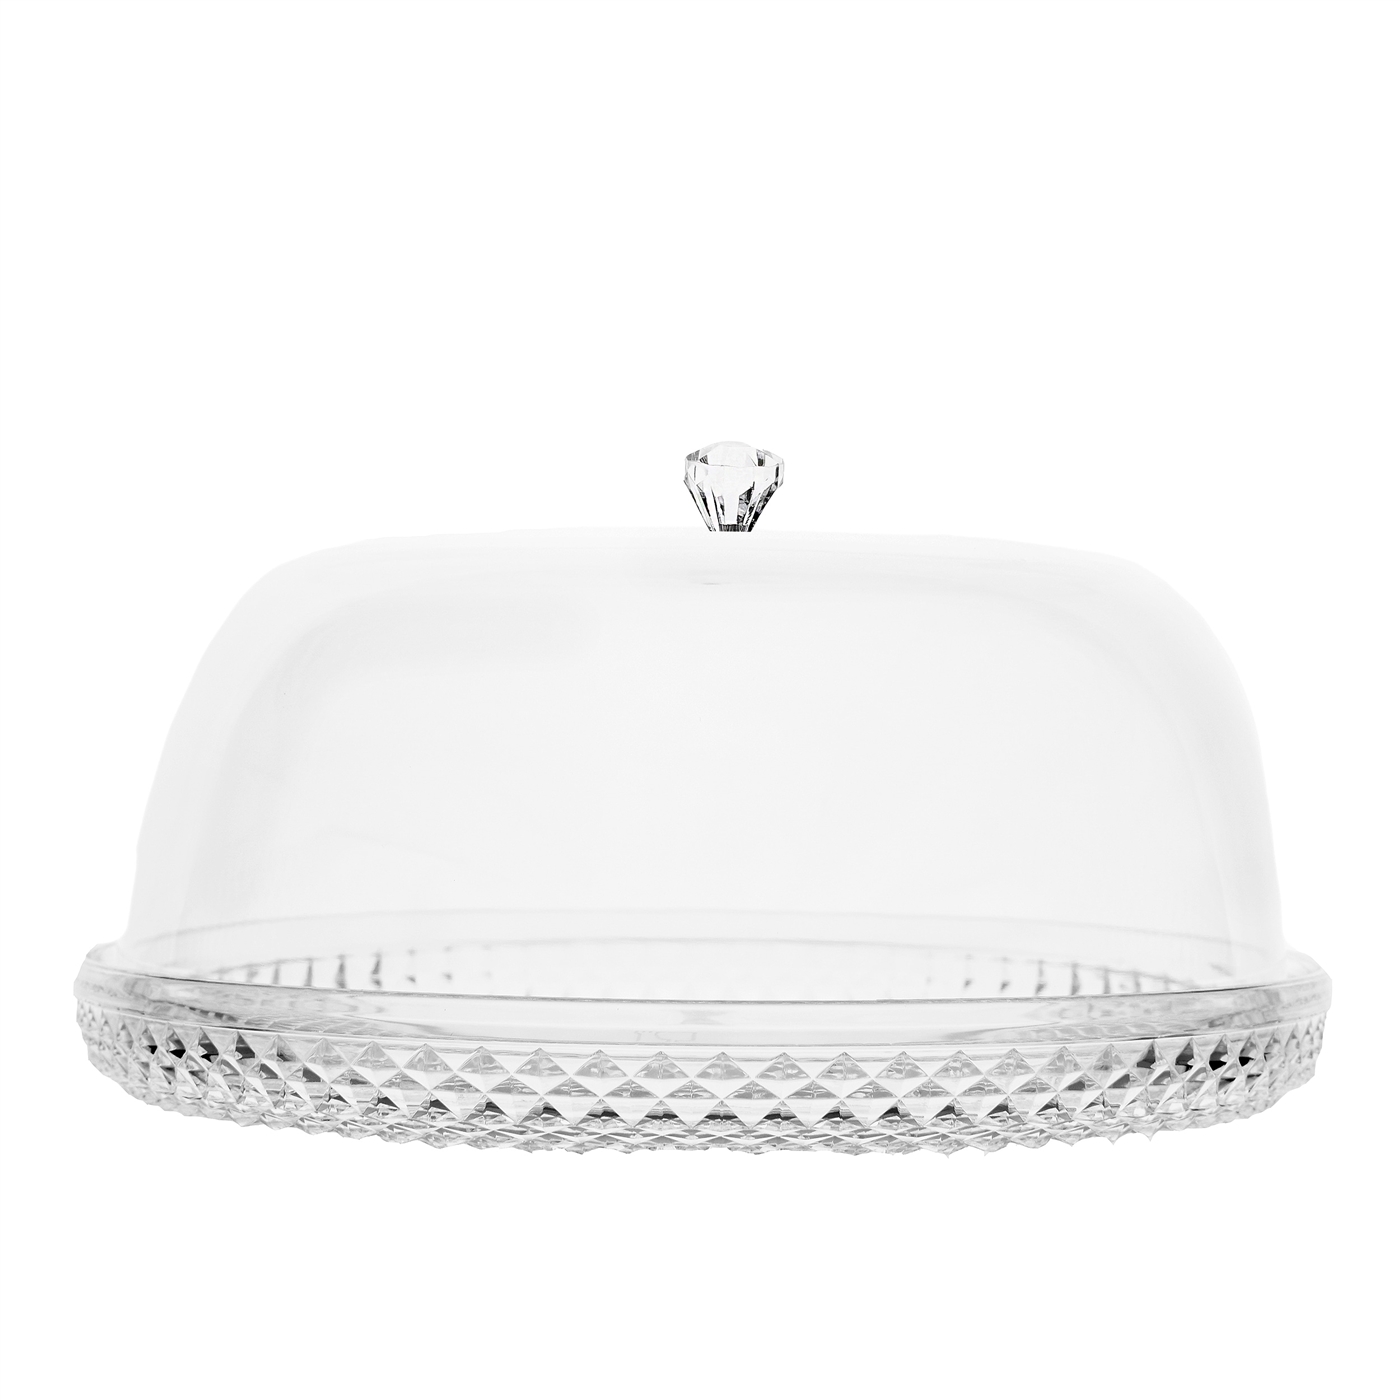 Lucite Cake Dome Platter with Crystal Effect